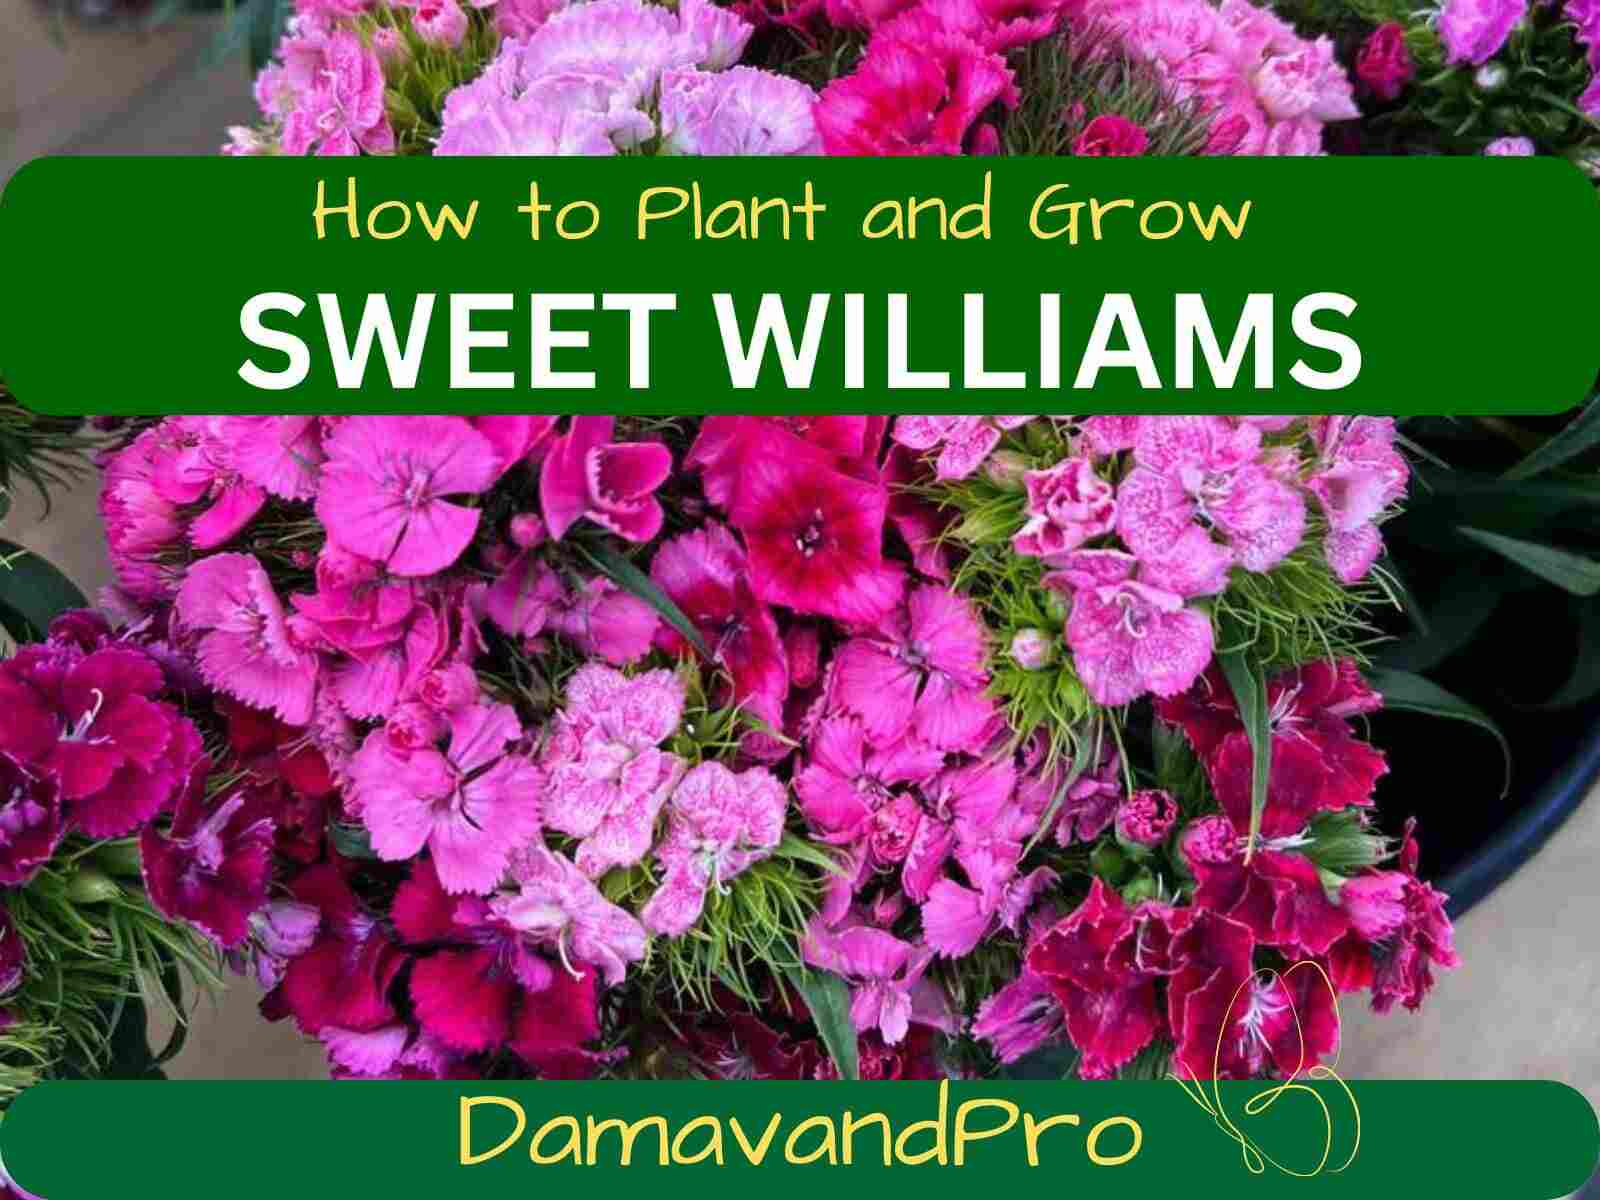 How to Grow Sweet William